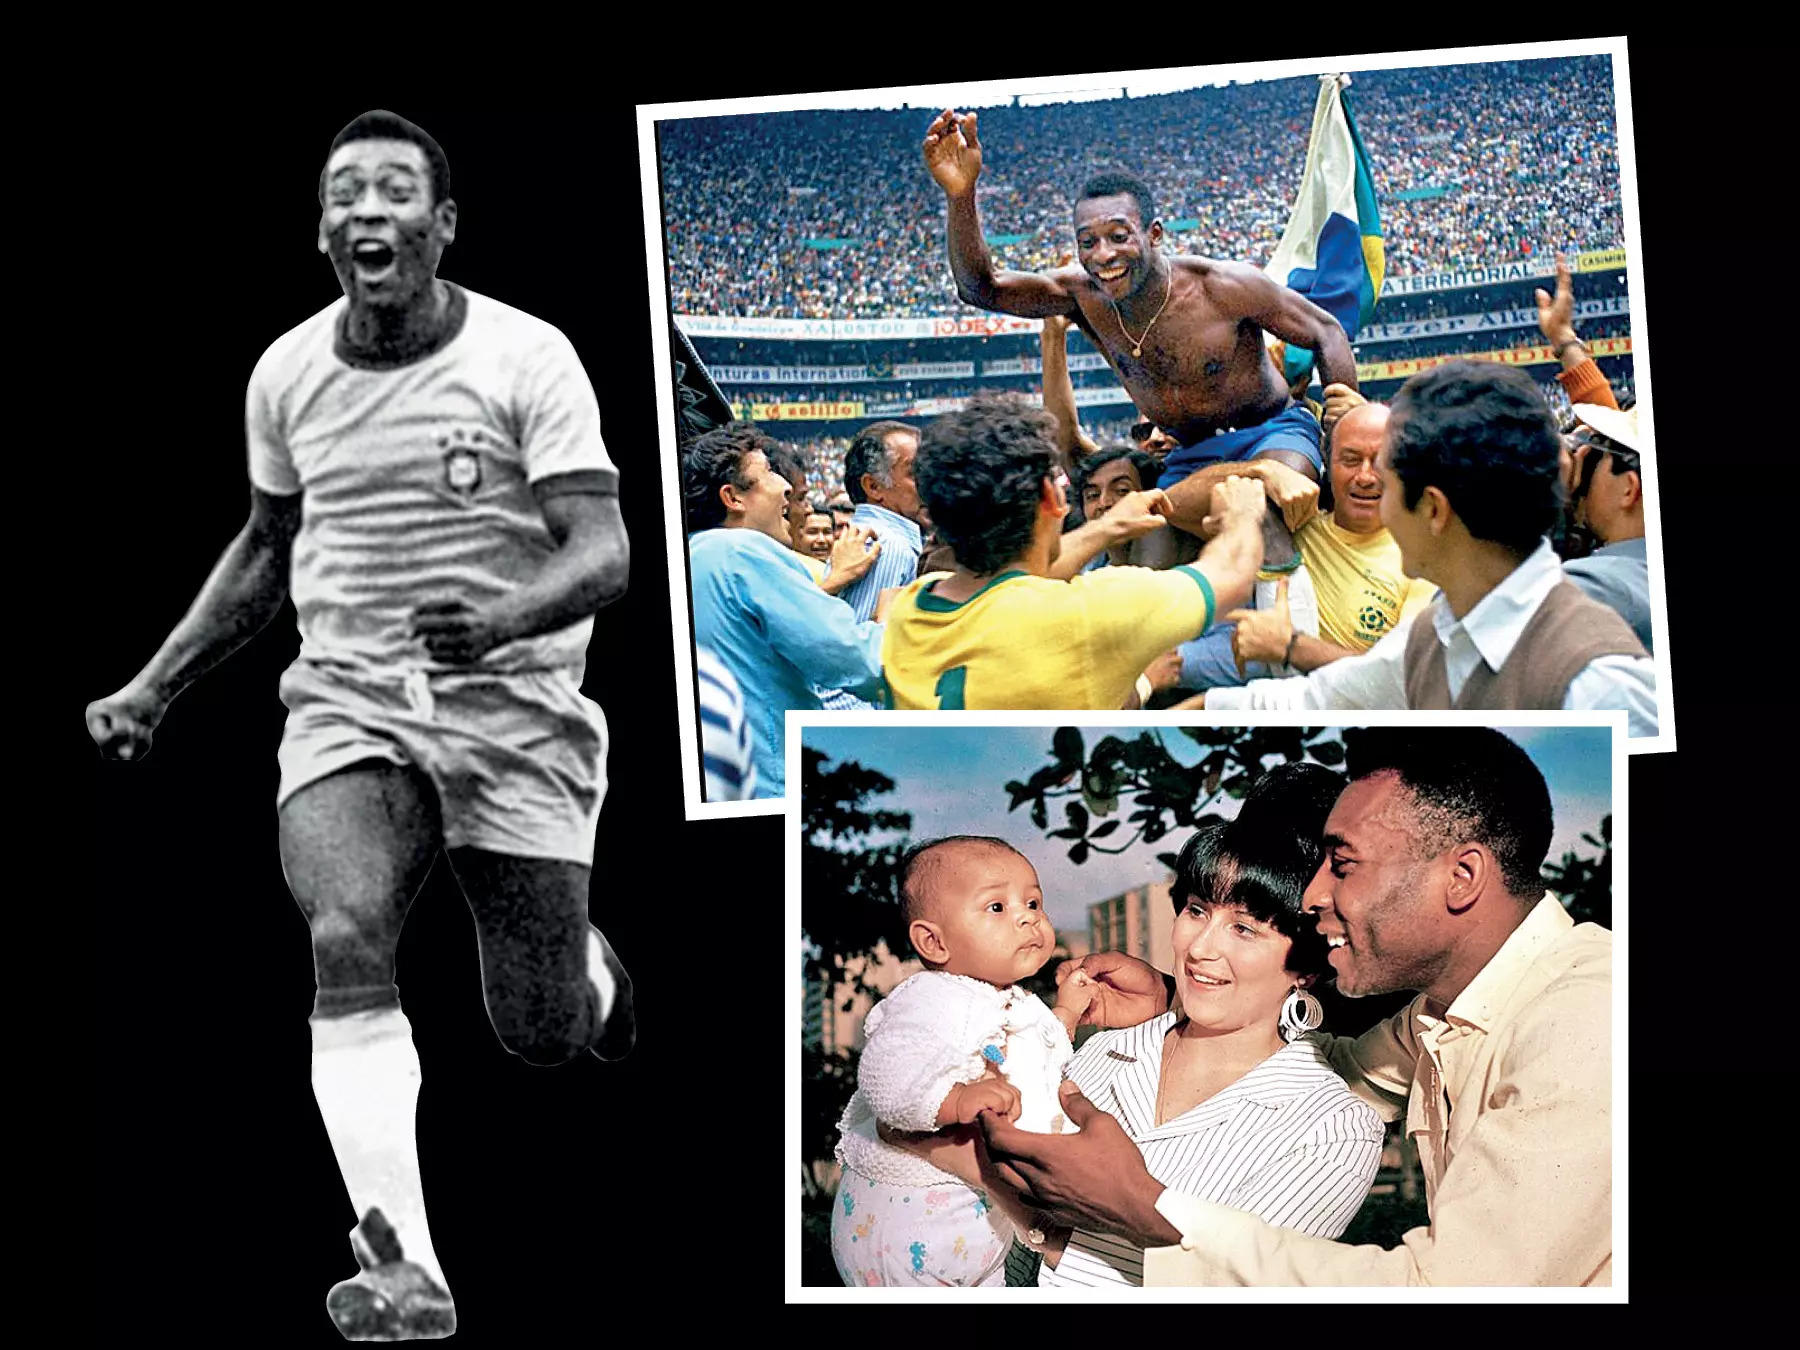 Revisiting Pele's advertising history